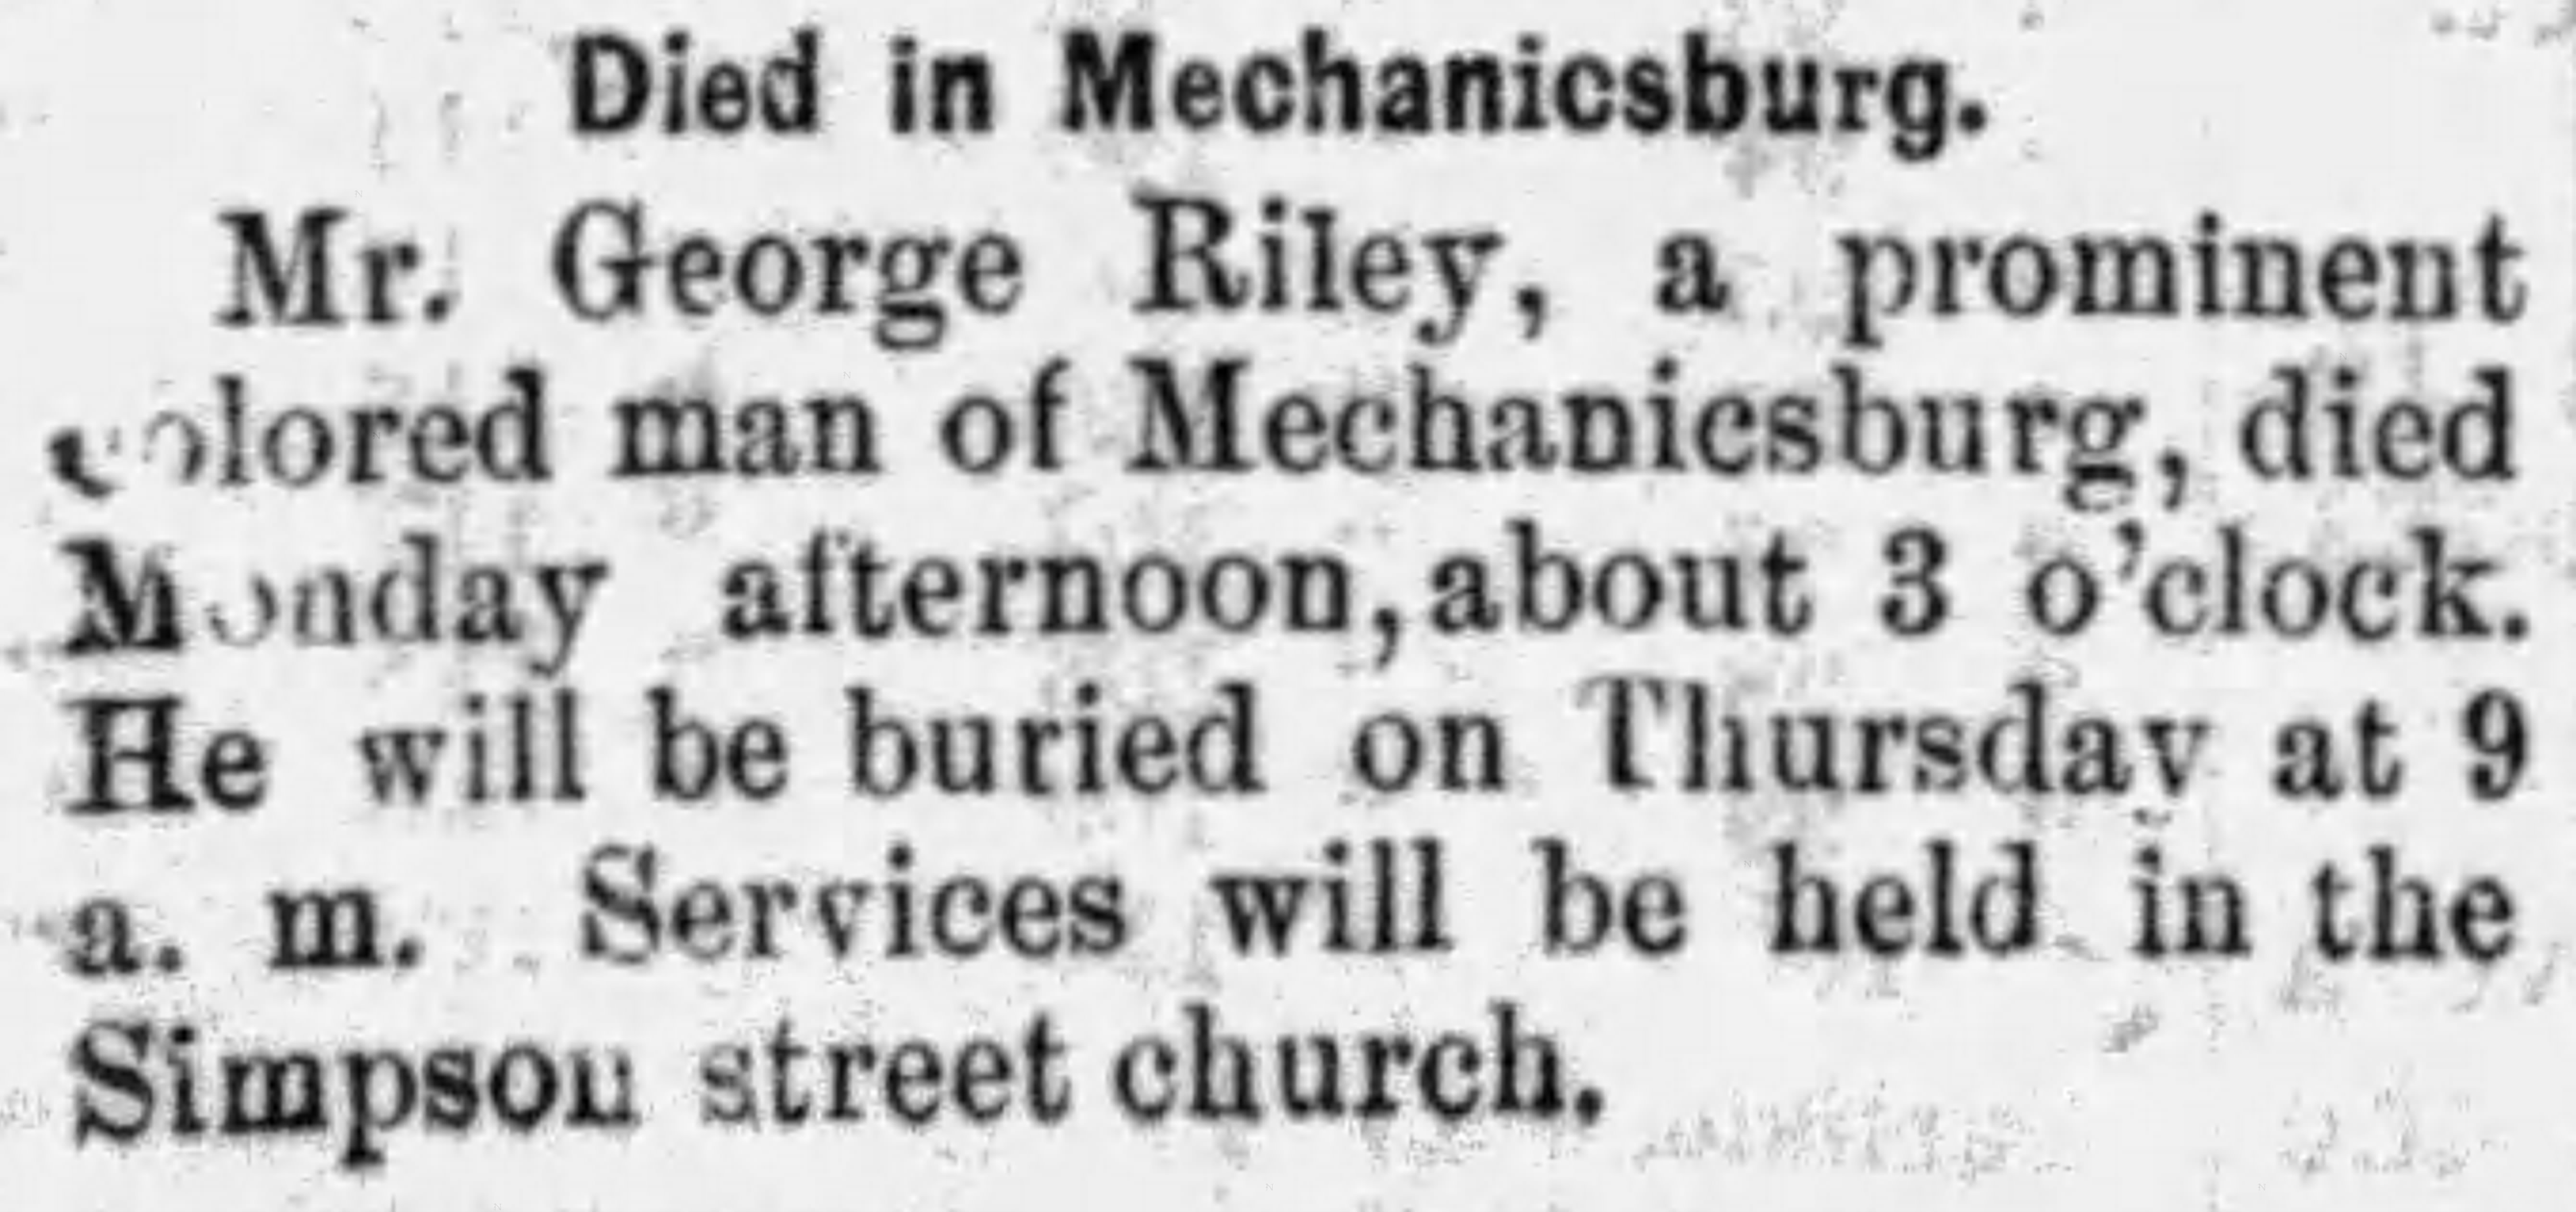 Newspaper notice about the death of George Riley